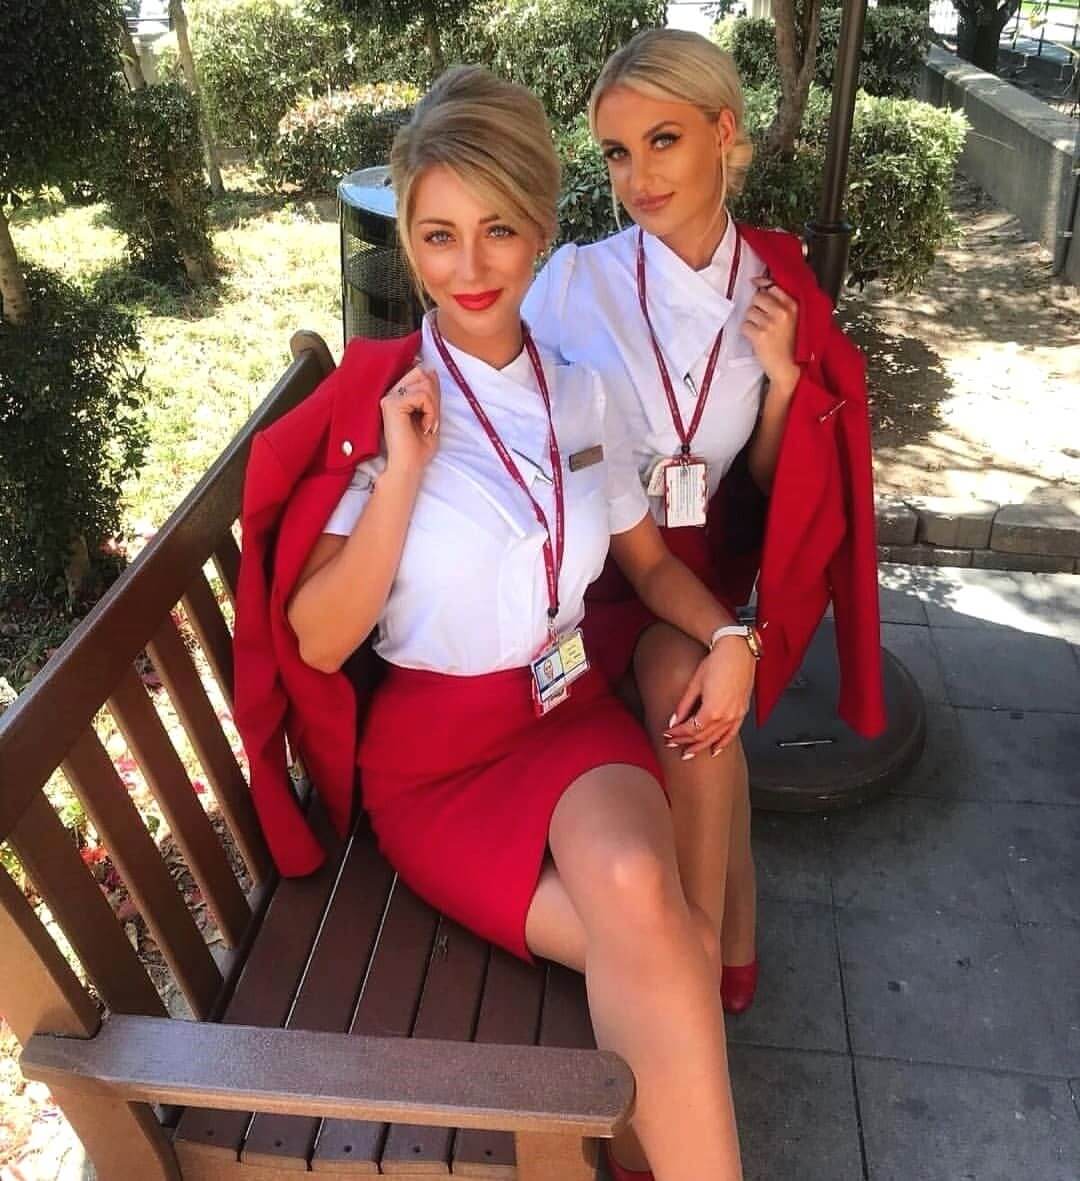 The Shockingly Raunchy Snaps Taken By Some Of Hottest Female Cabin Crew In The World! 105